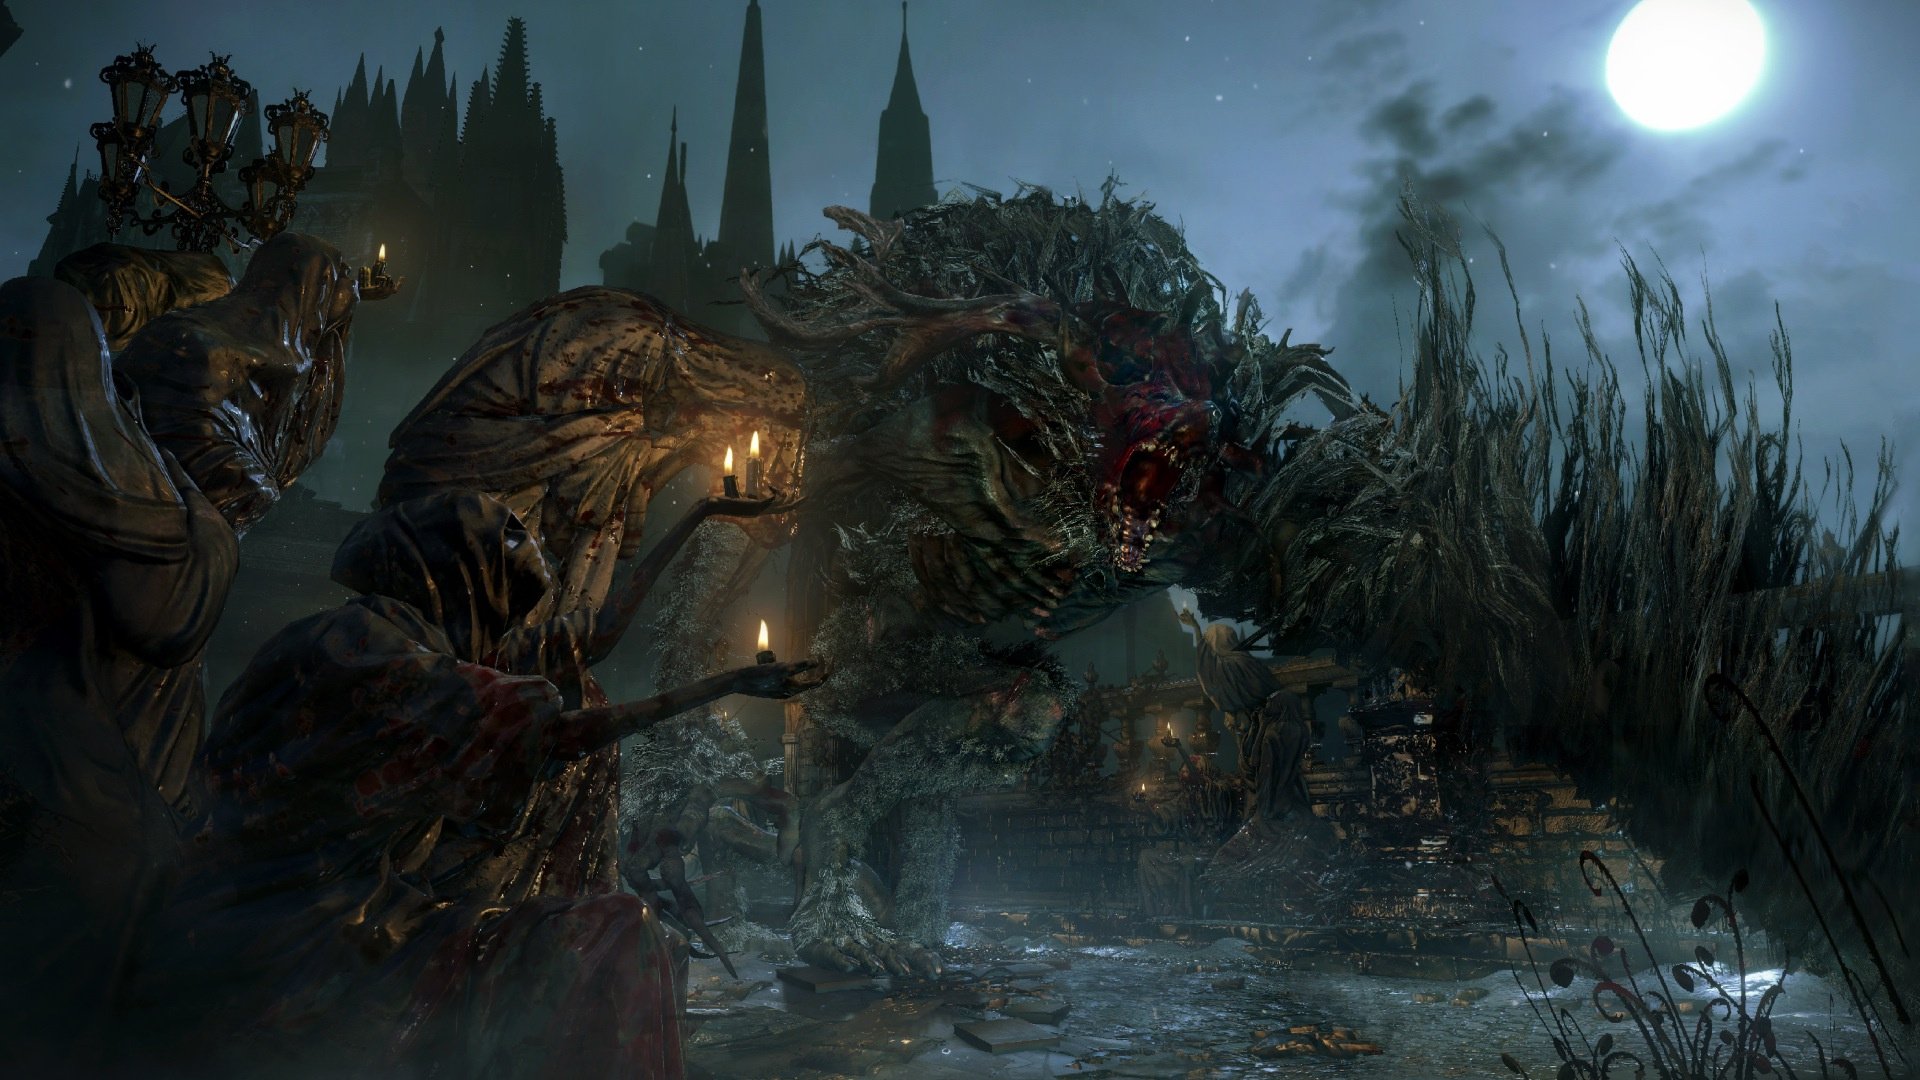 bloodborne pc or ps4